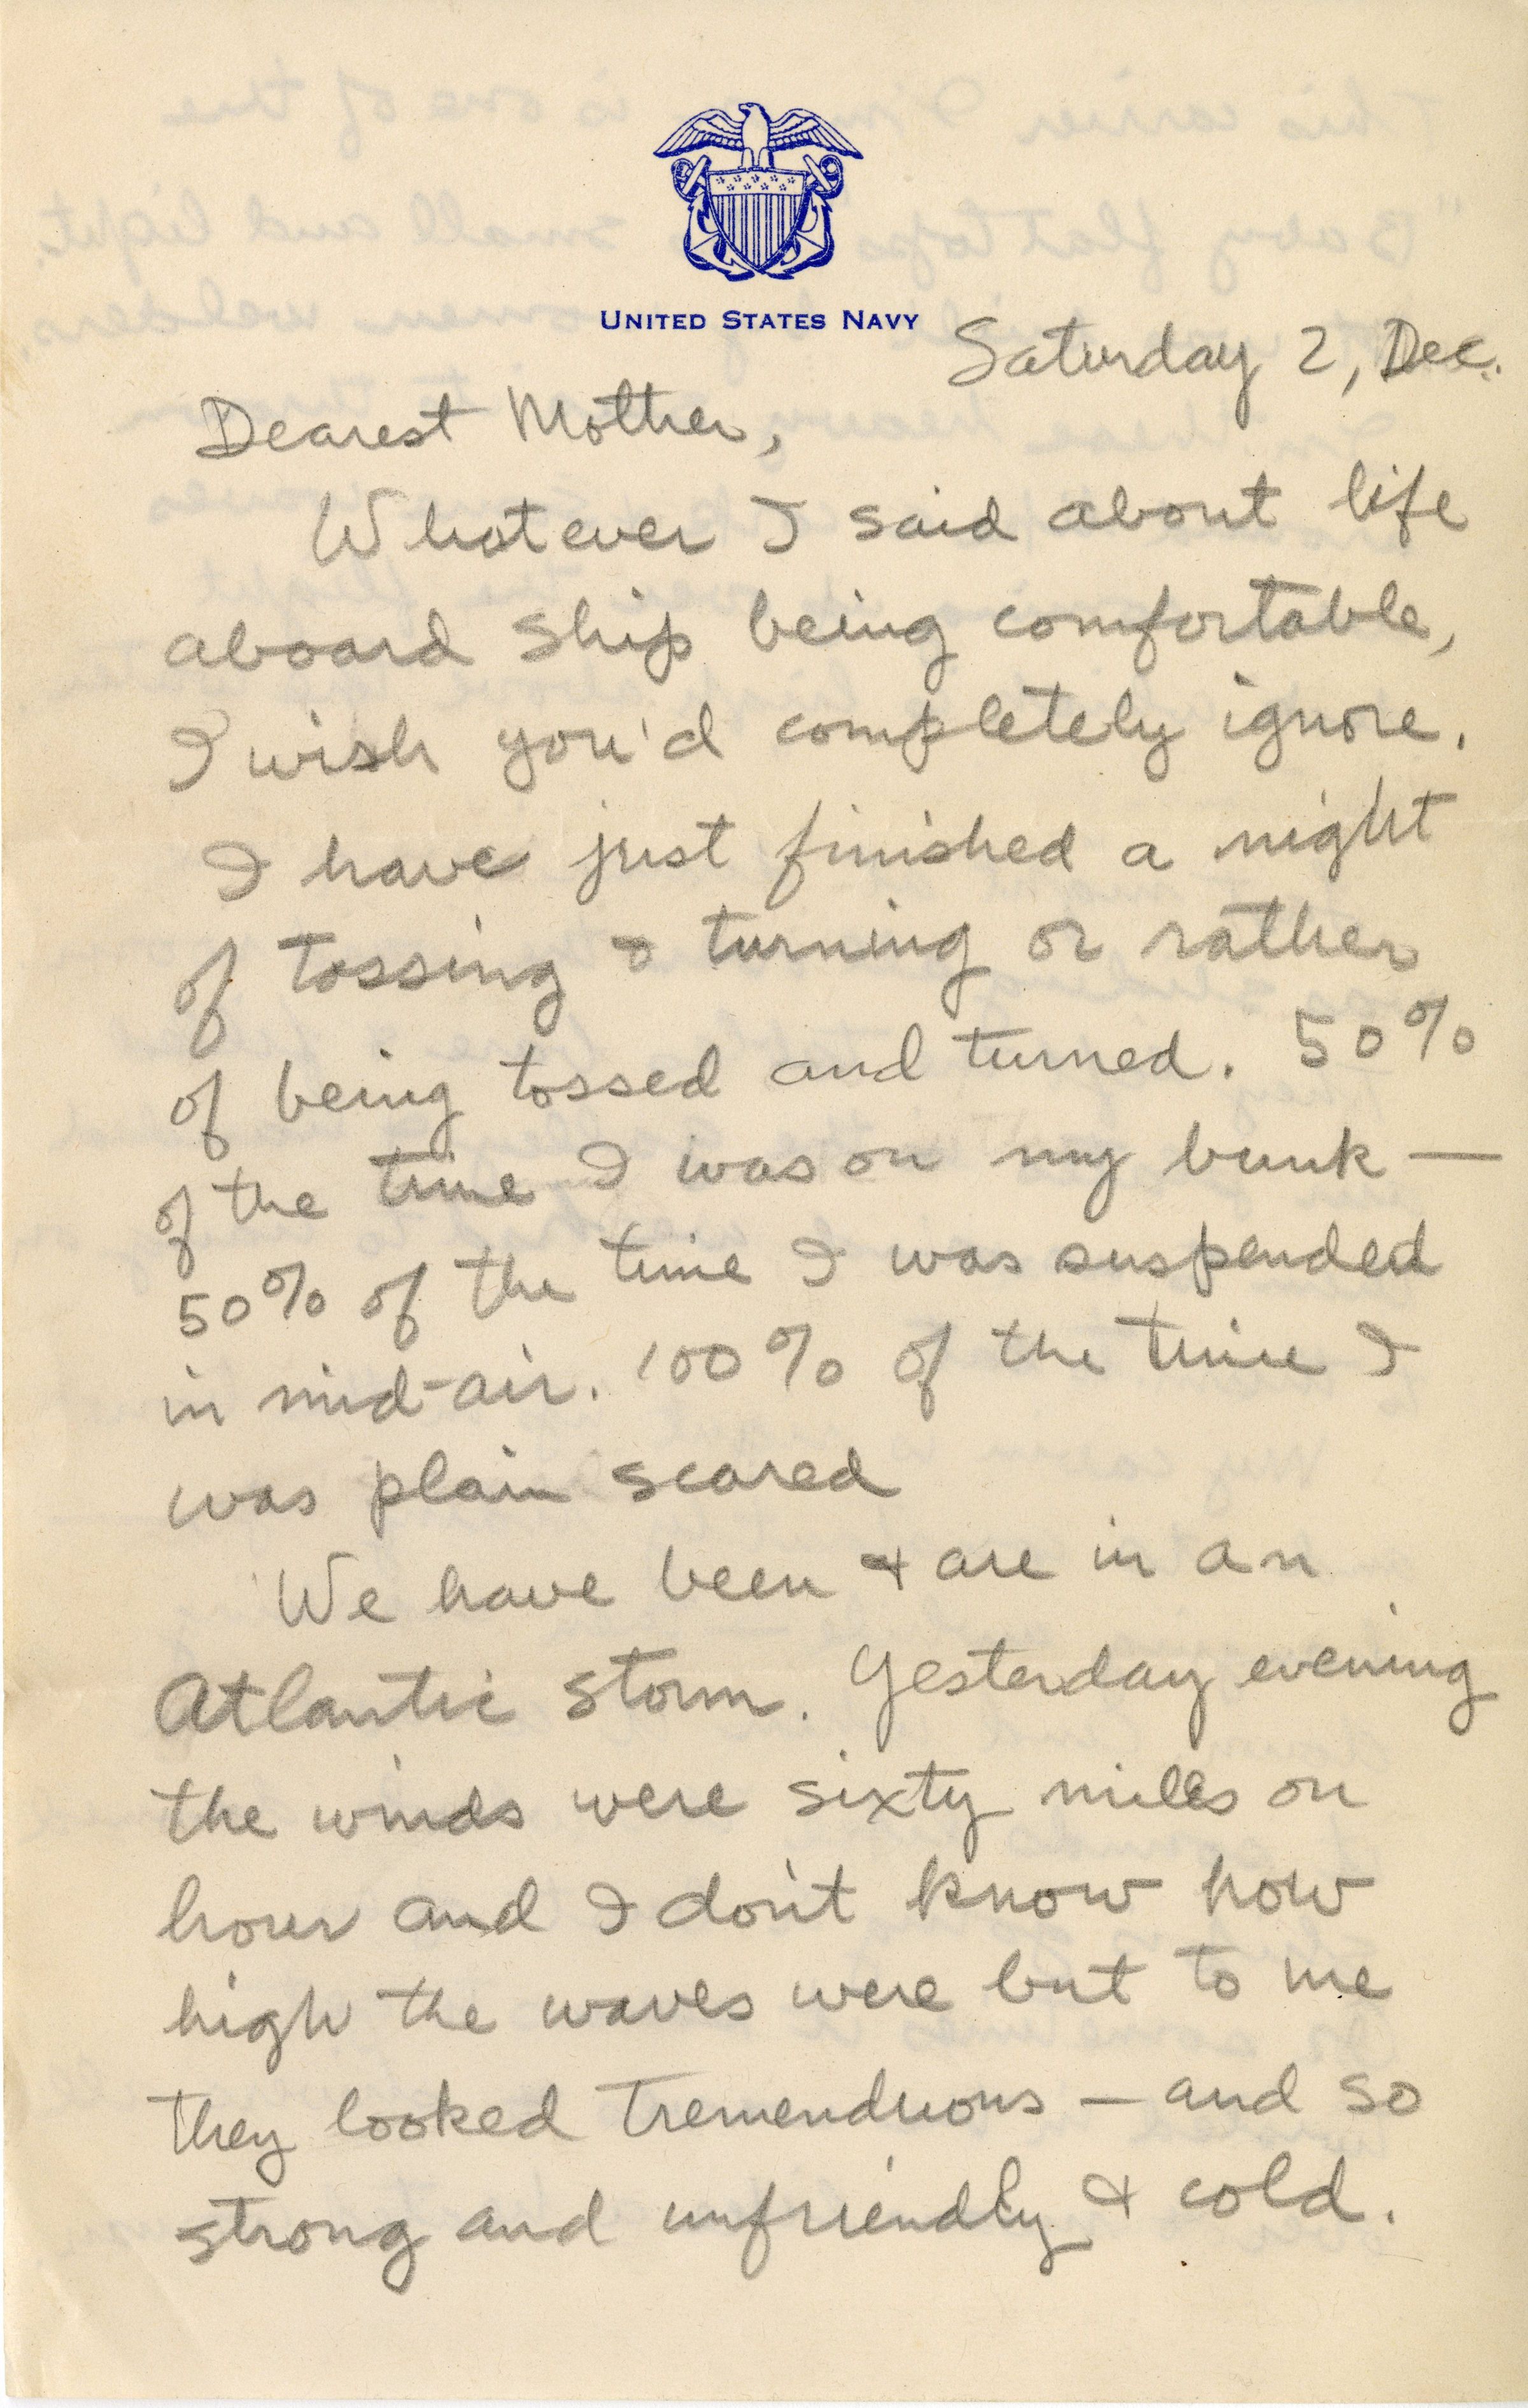 Primary Image of Gerald Hennesy Letter Dated Saturday, December 2, 1944